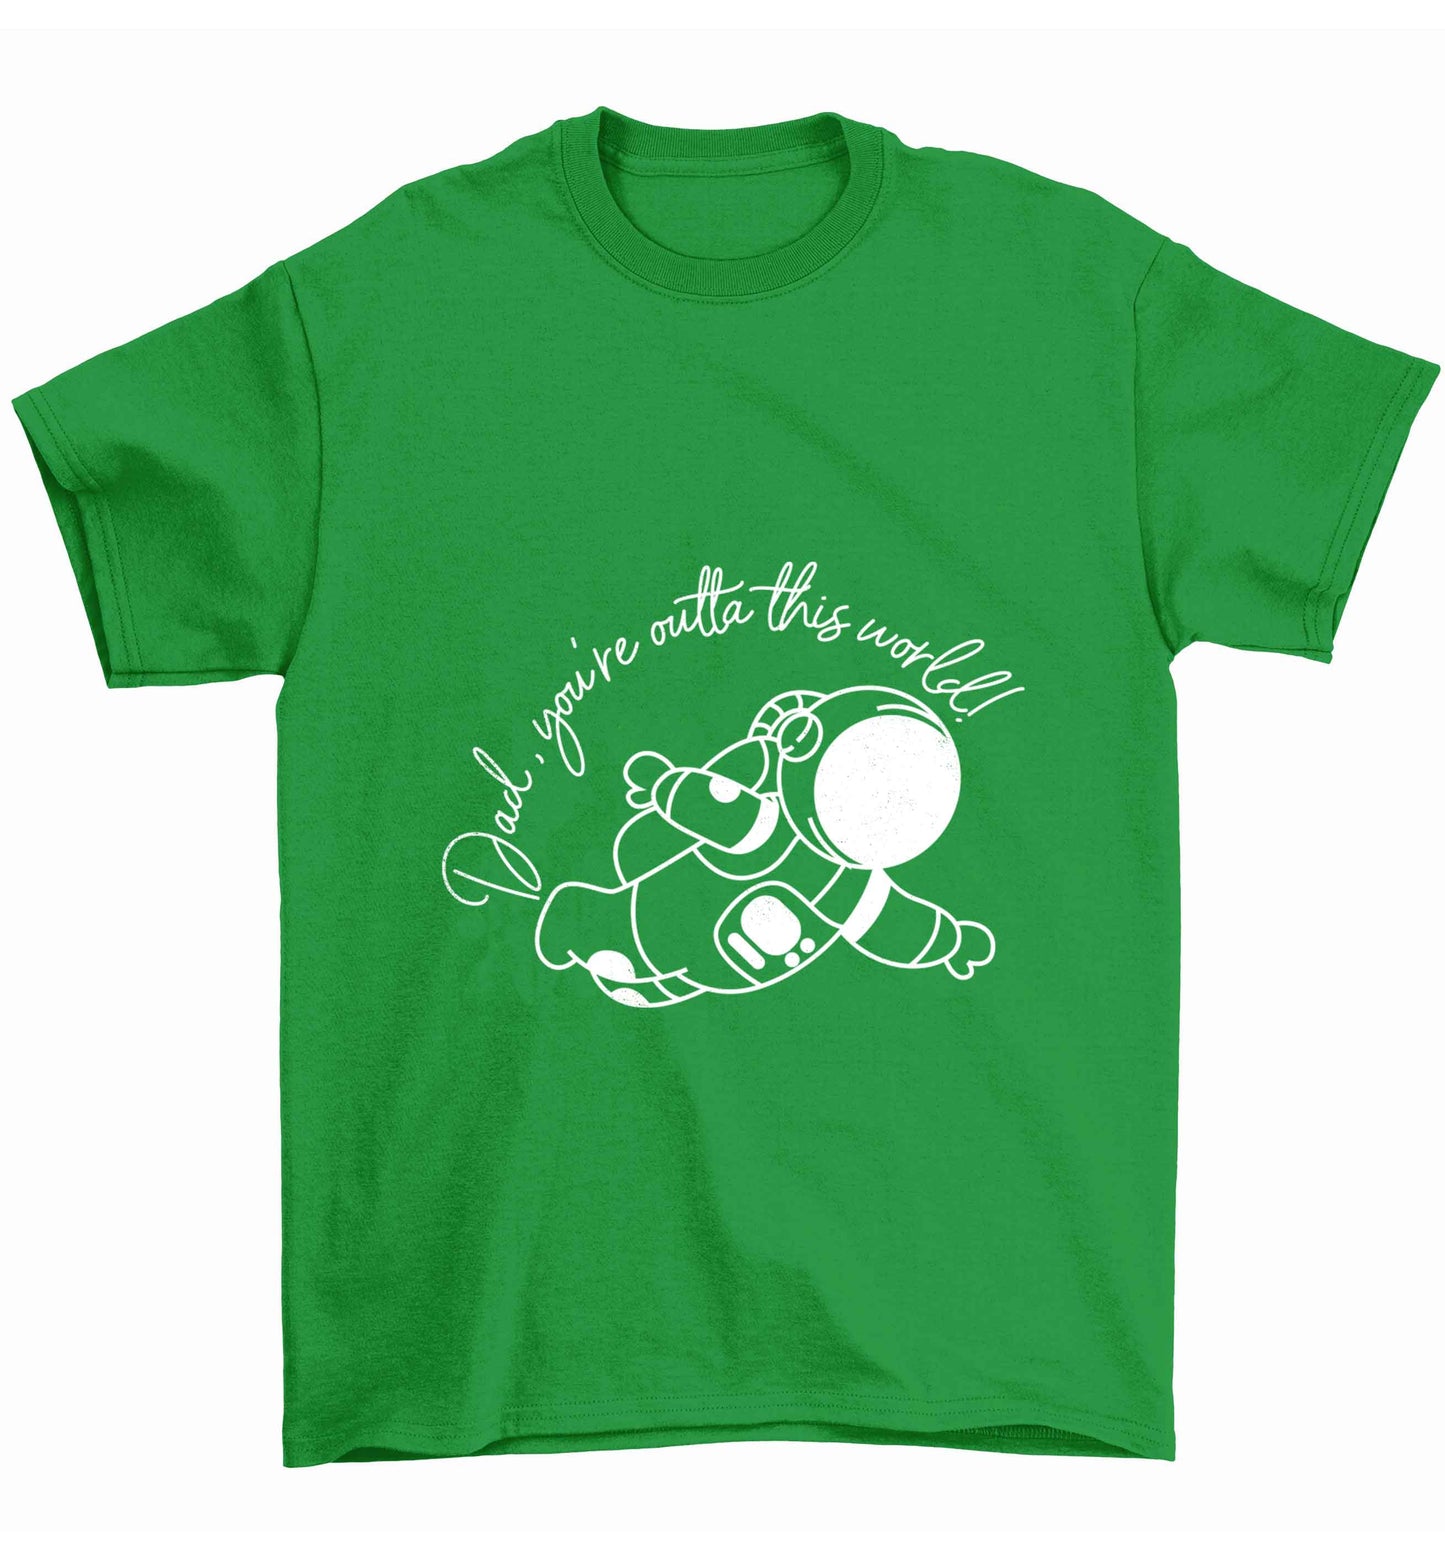 Dad, you're outta this world Children's green Tshirt 12-13 Years